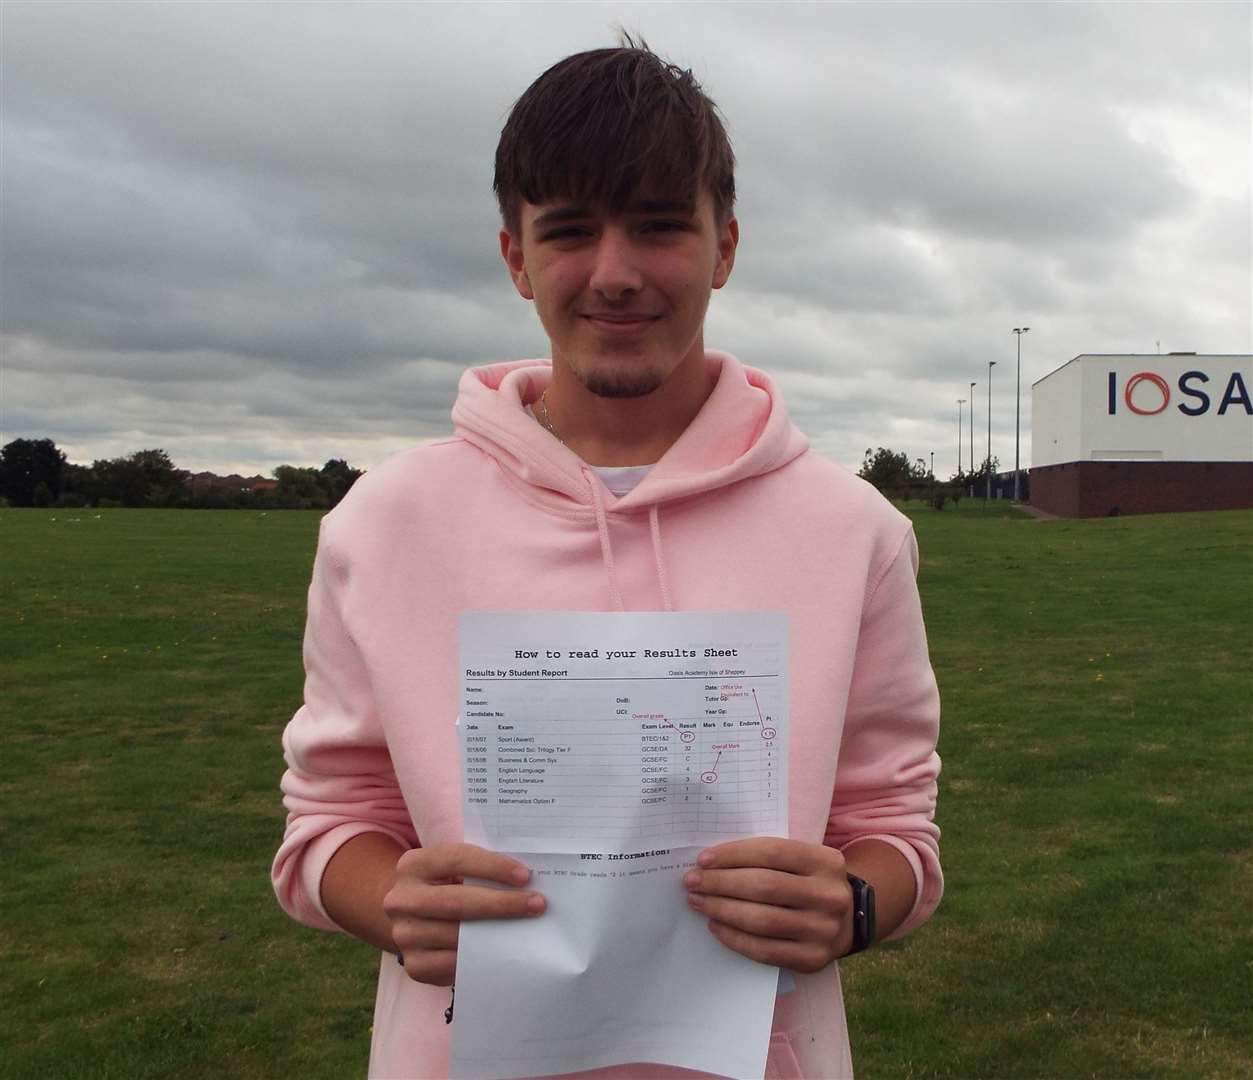 Oasis Isle of Sheppey Academy pupil Ben Dewsall, 16, from Sheerness with his GCSE results